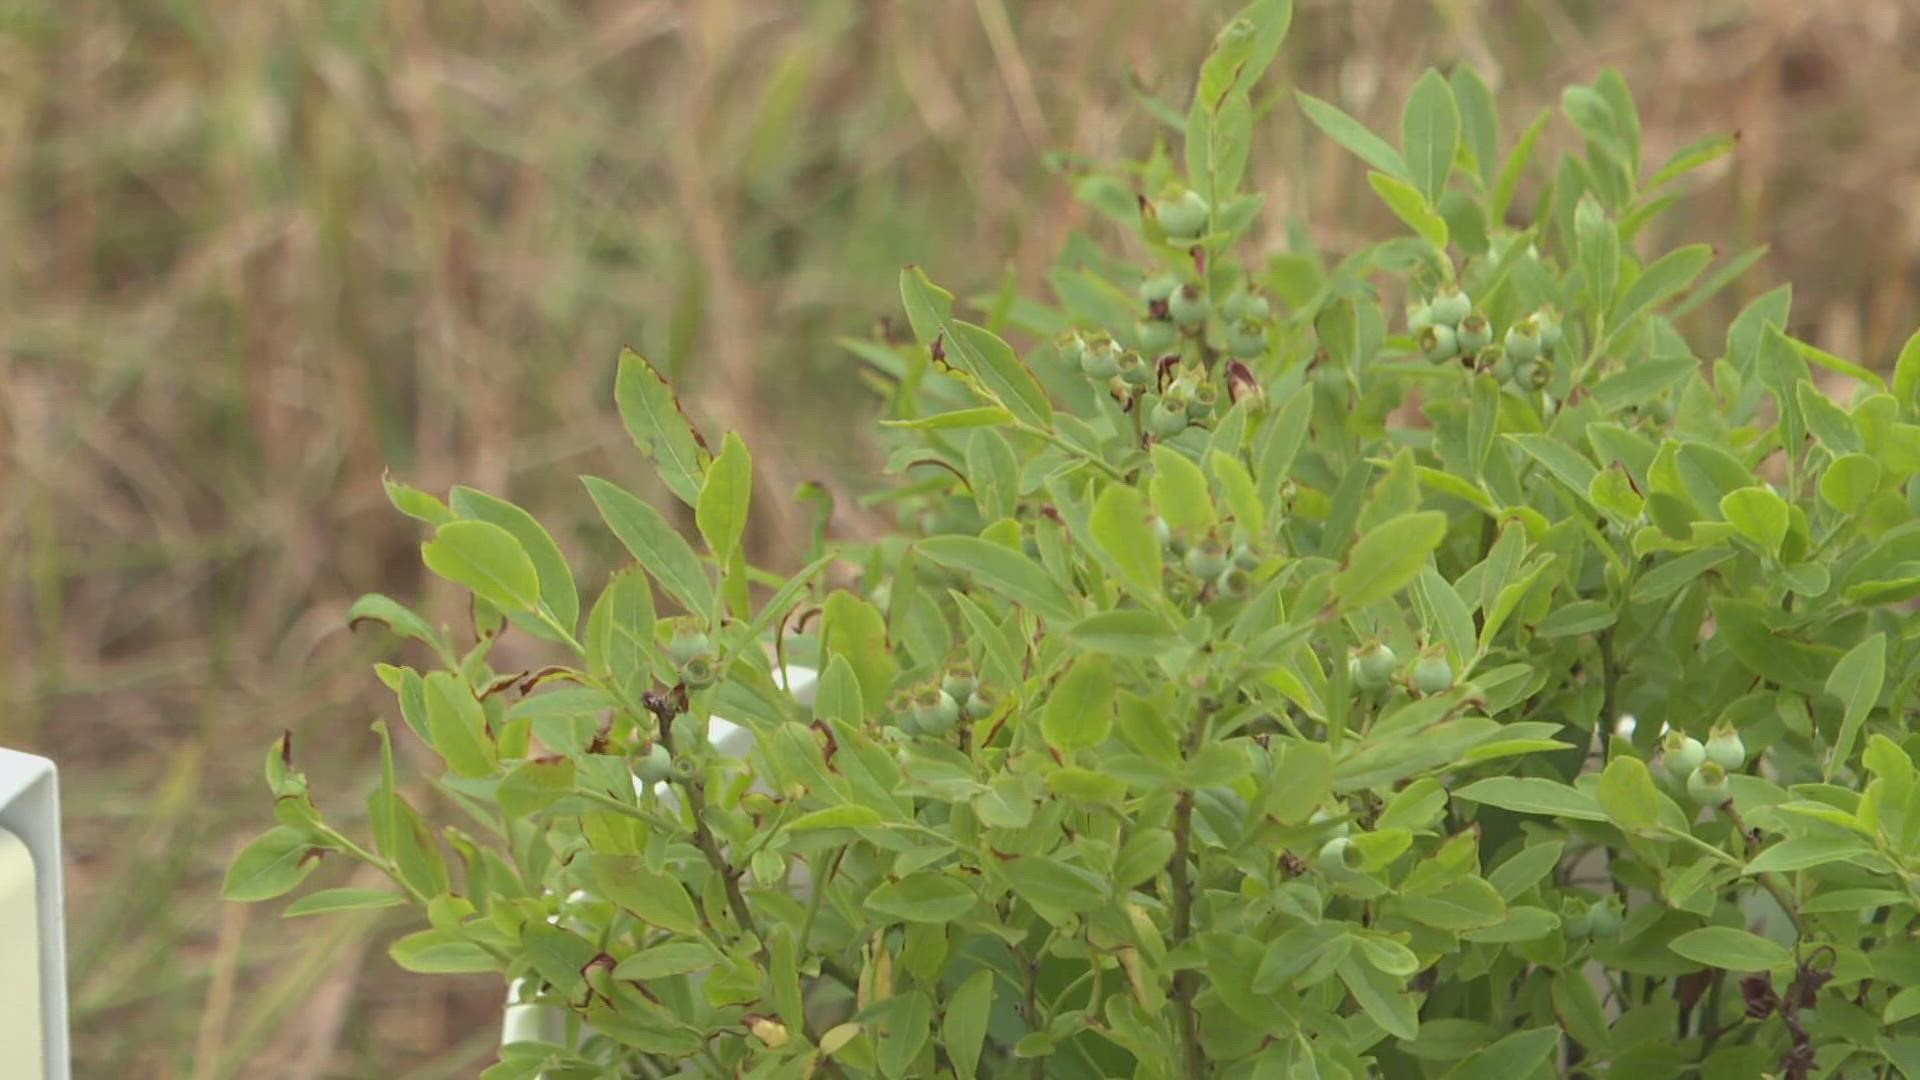 The wild blueberry field will act as a research and education center for University of Maine students.